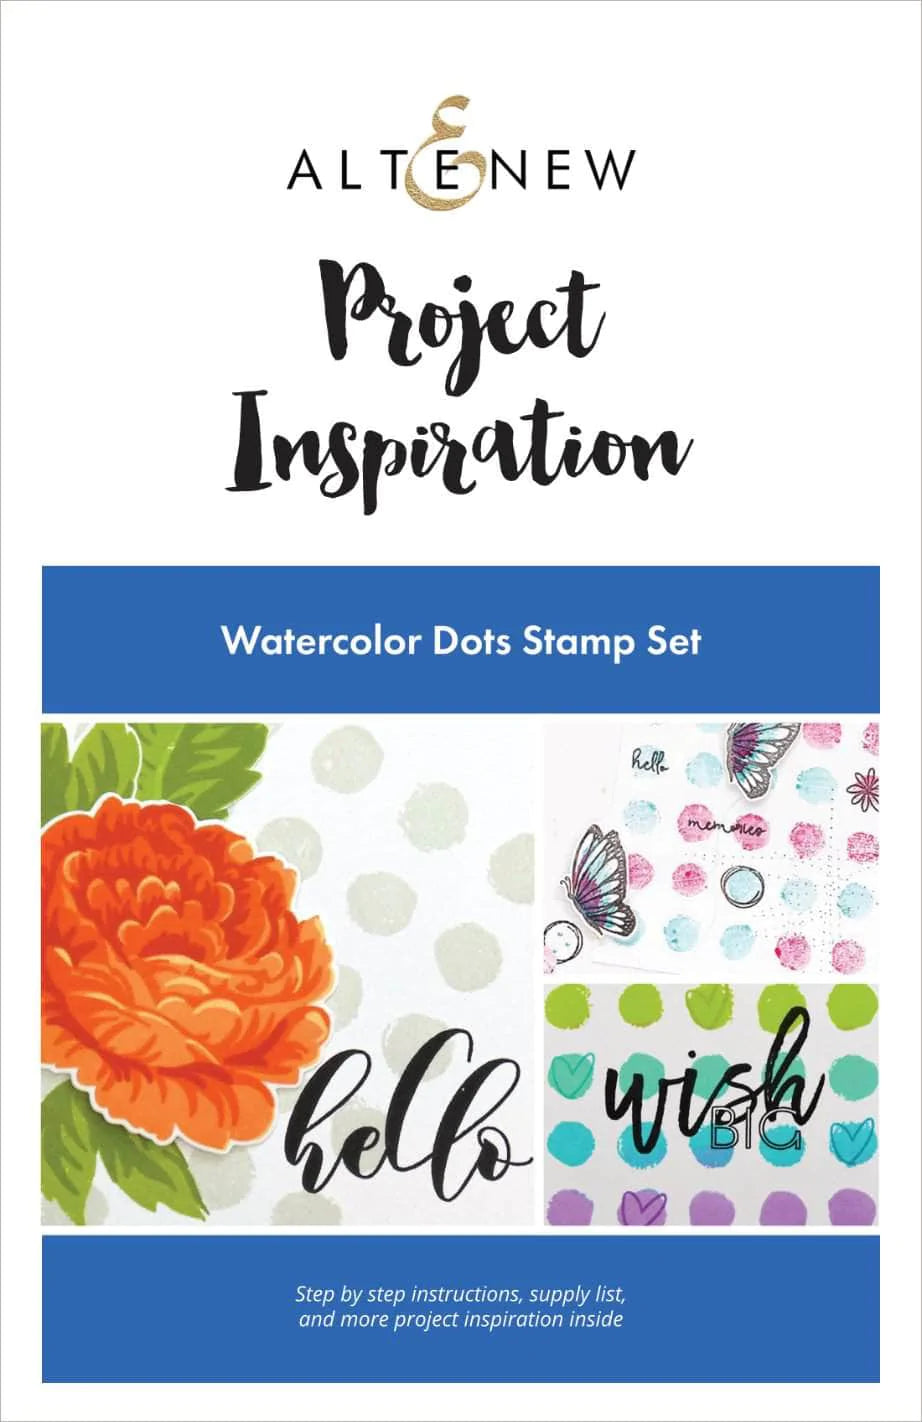 Printed Media Watercolor Dots Project Inspiration Guide